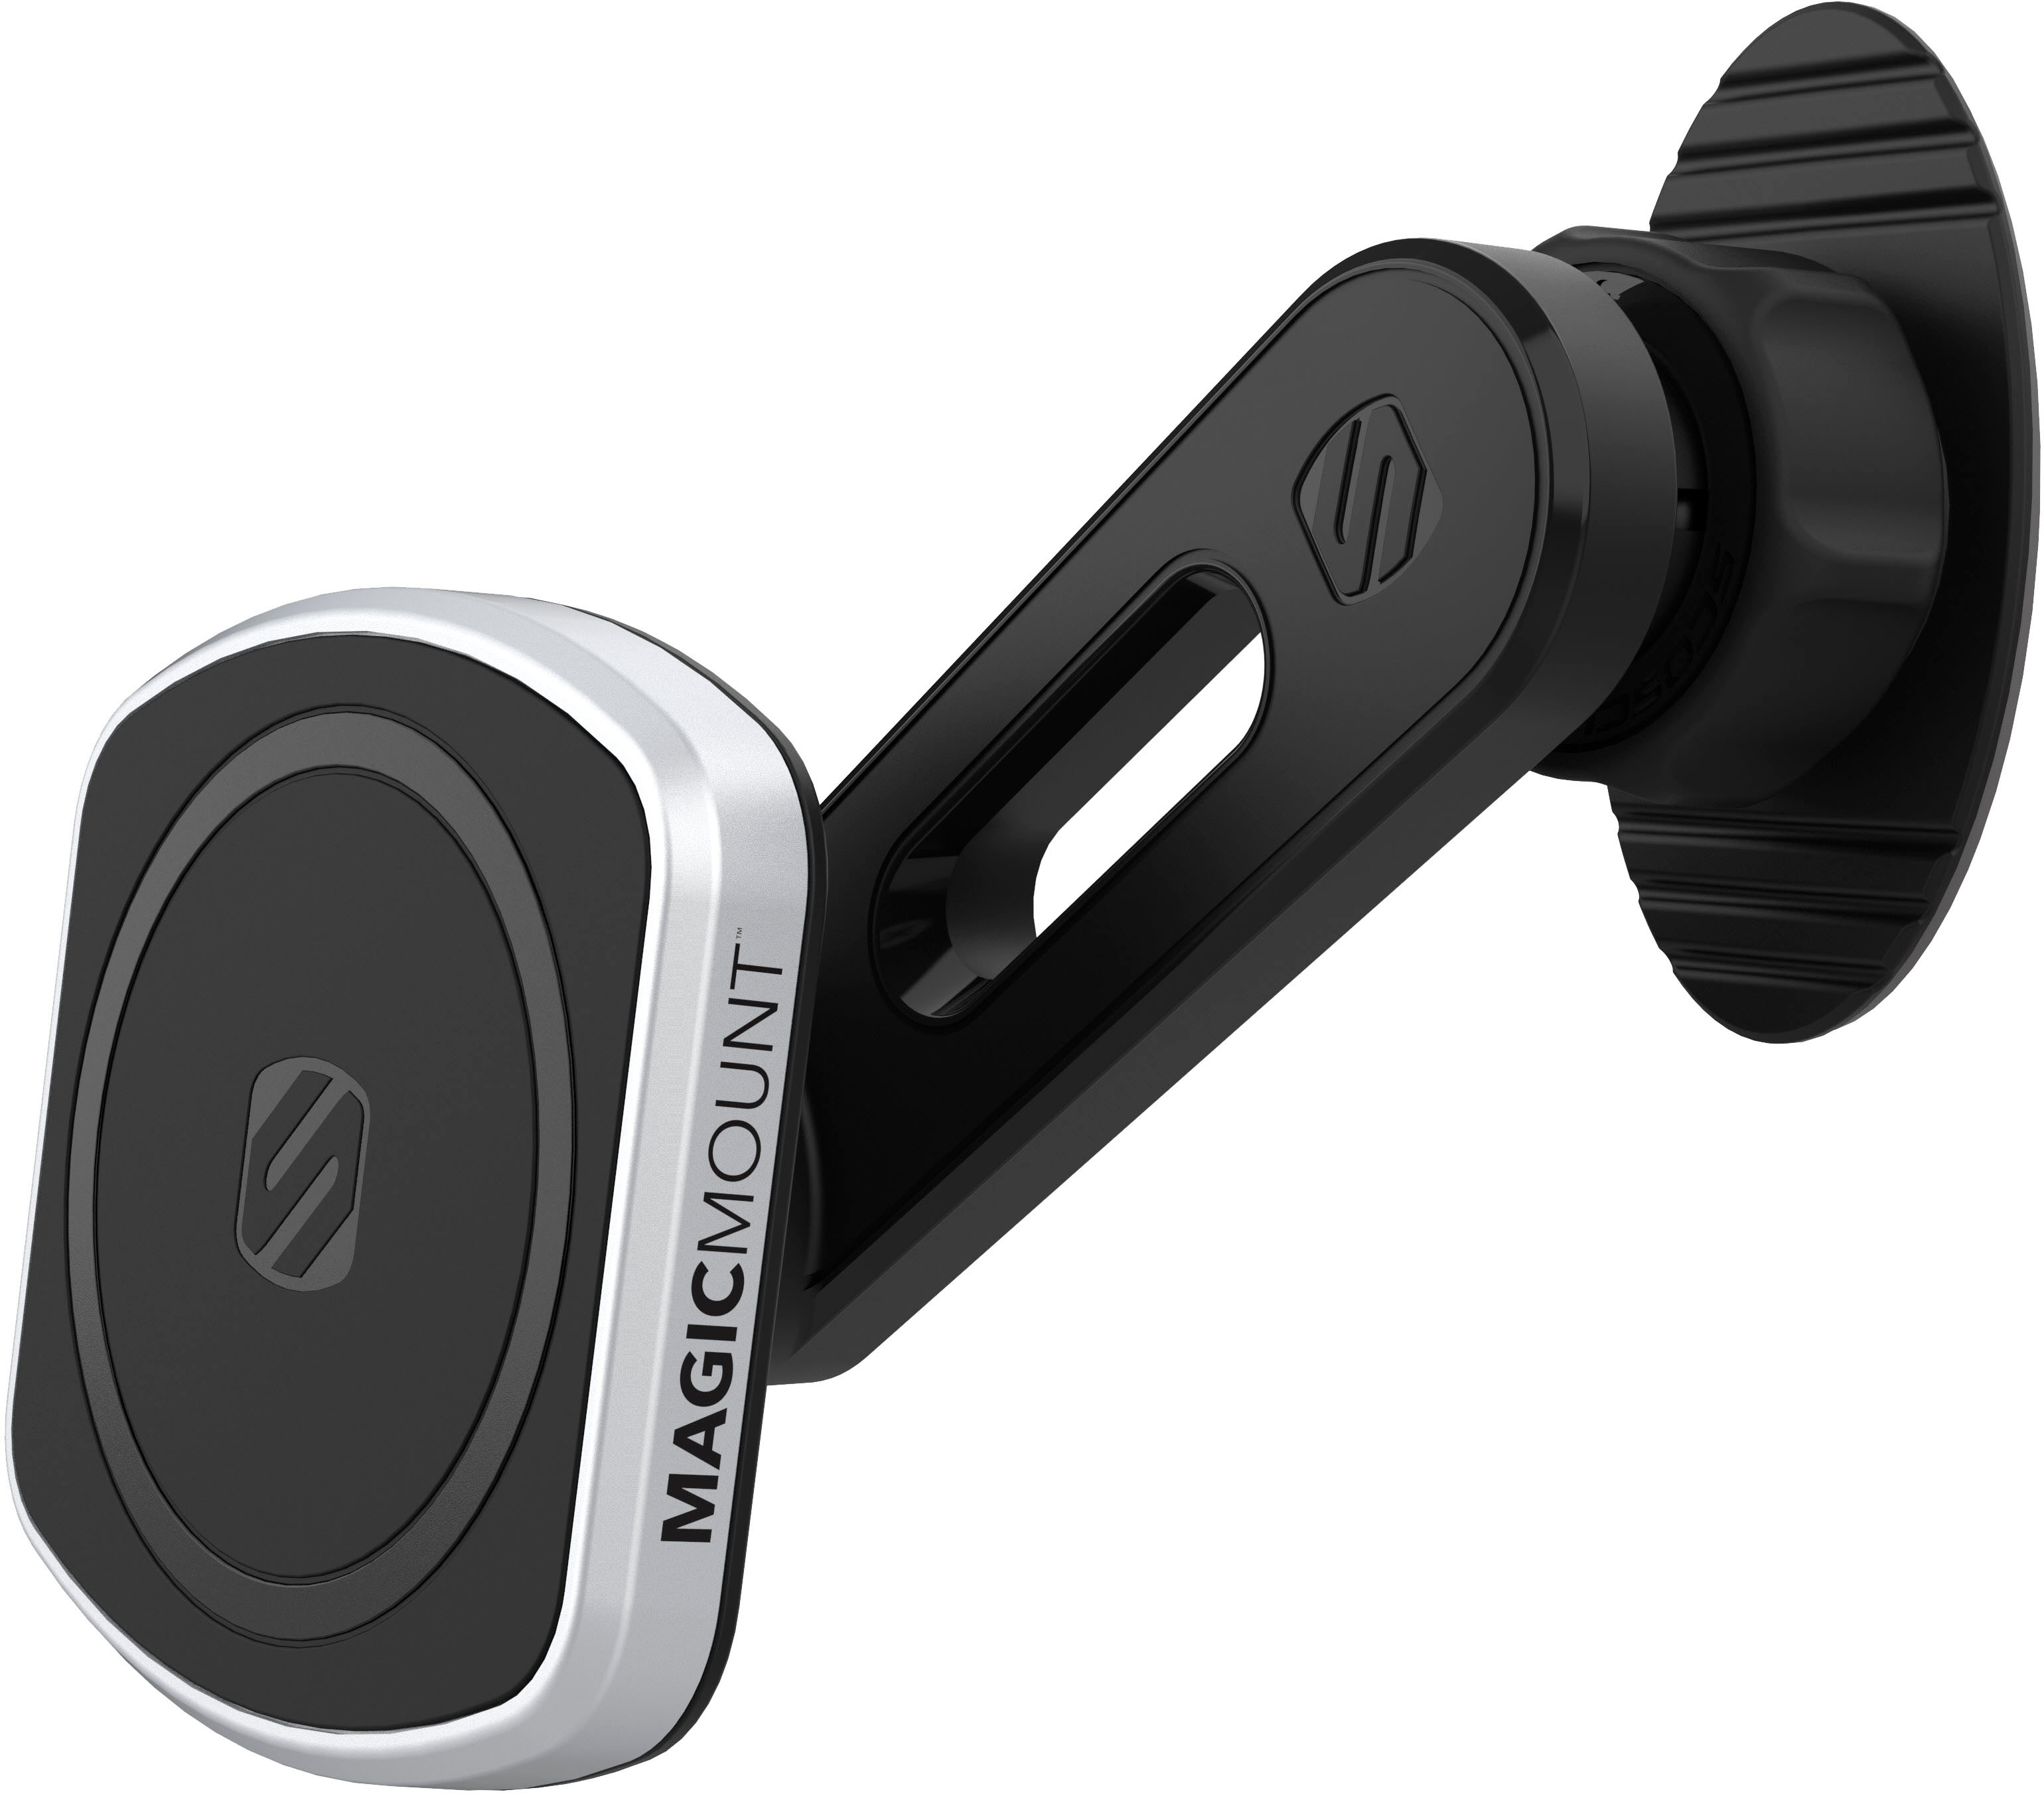 Angle View: ToughTested - Boom Adjustable Mobile Cup Holder Mount for Most Cell Phones. - Black